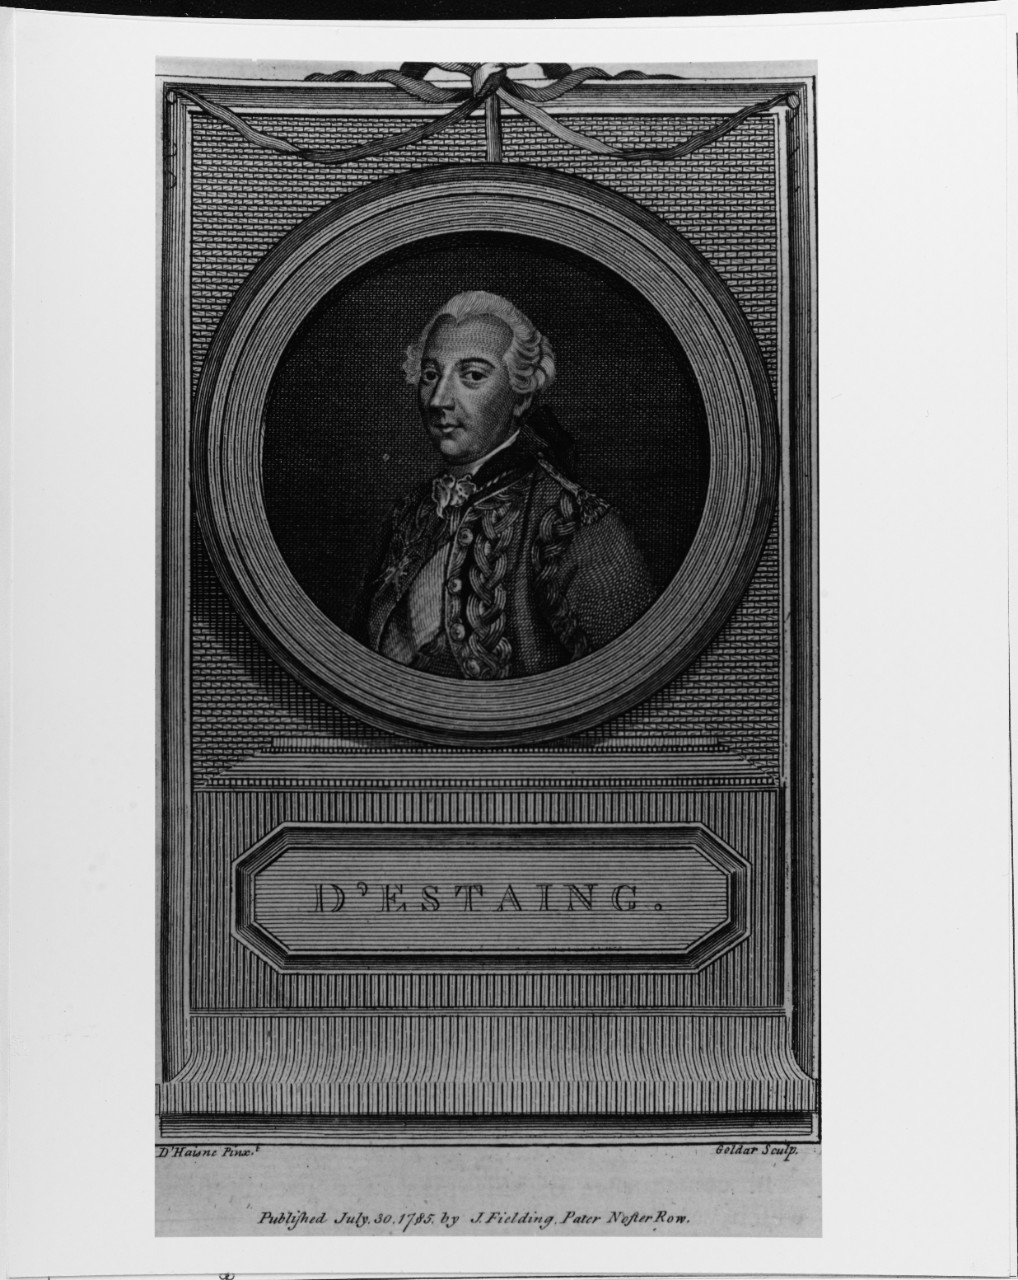 Charles Hector Estaing, Comte D'Estaing (1729-1794), French Admiral